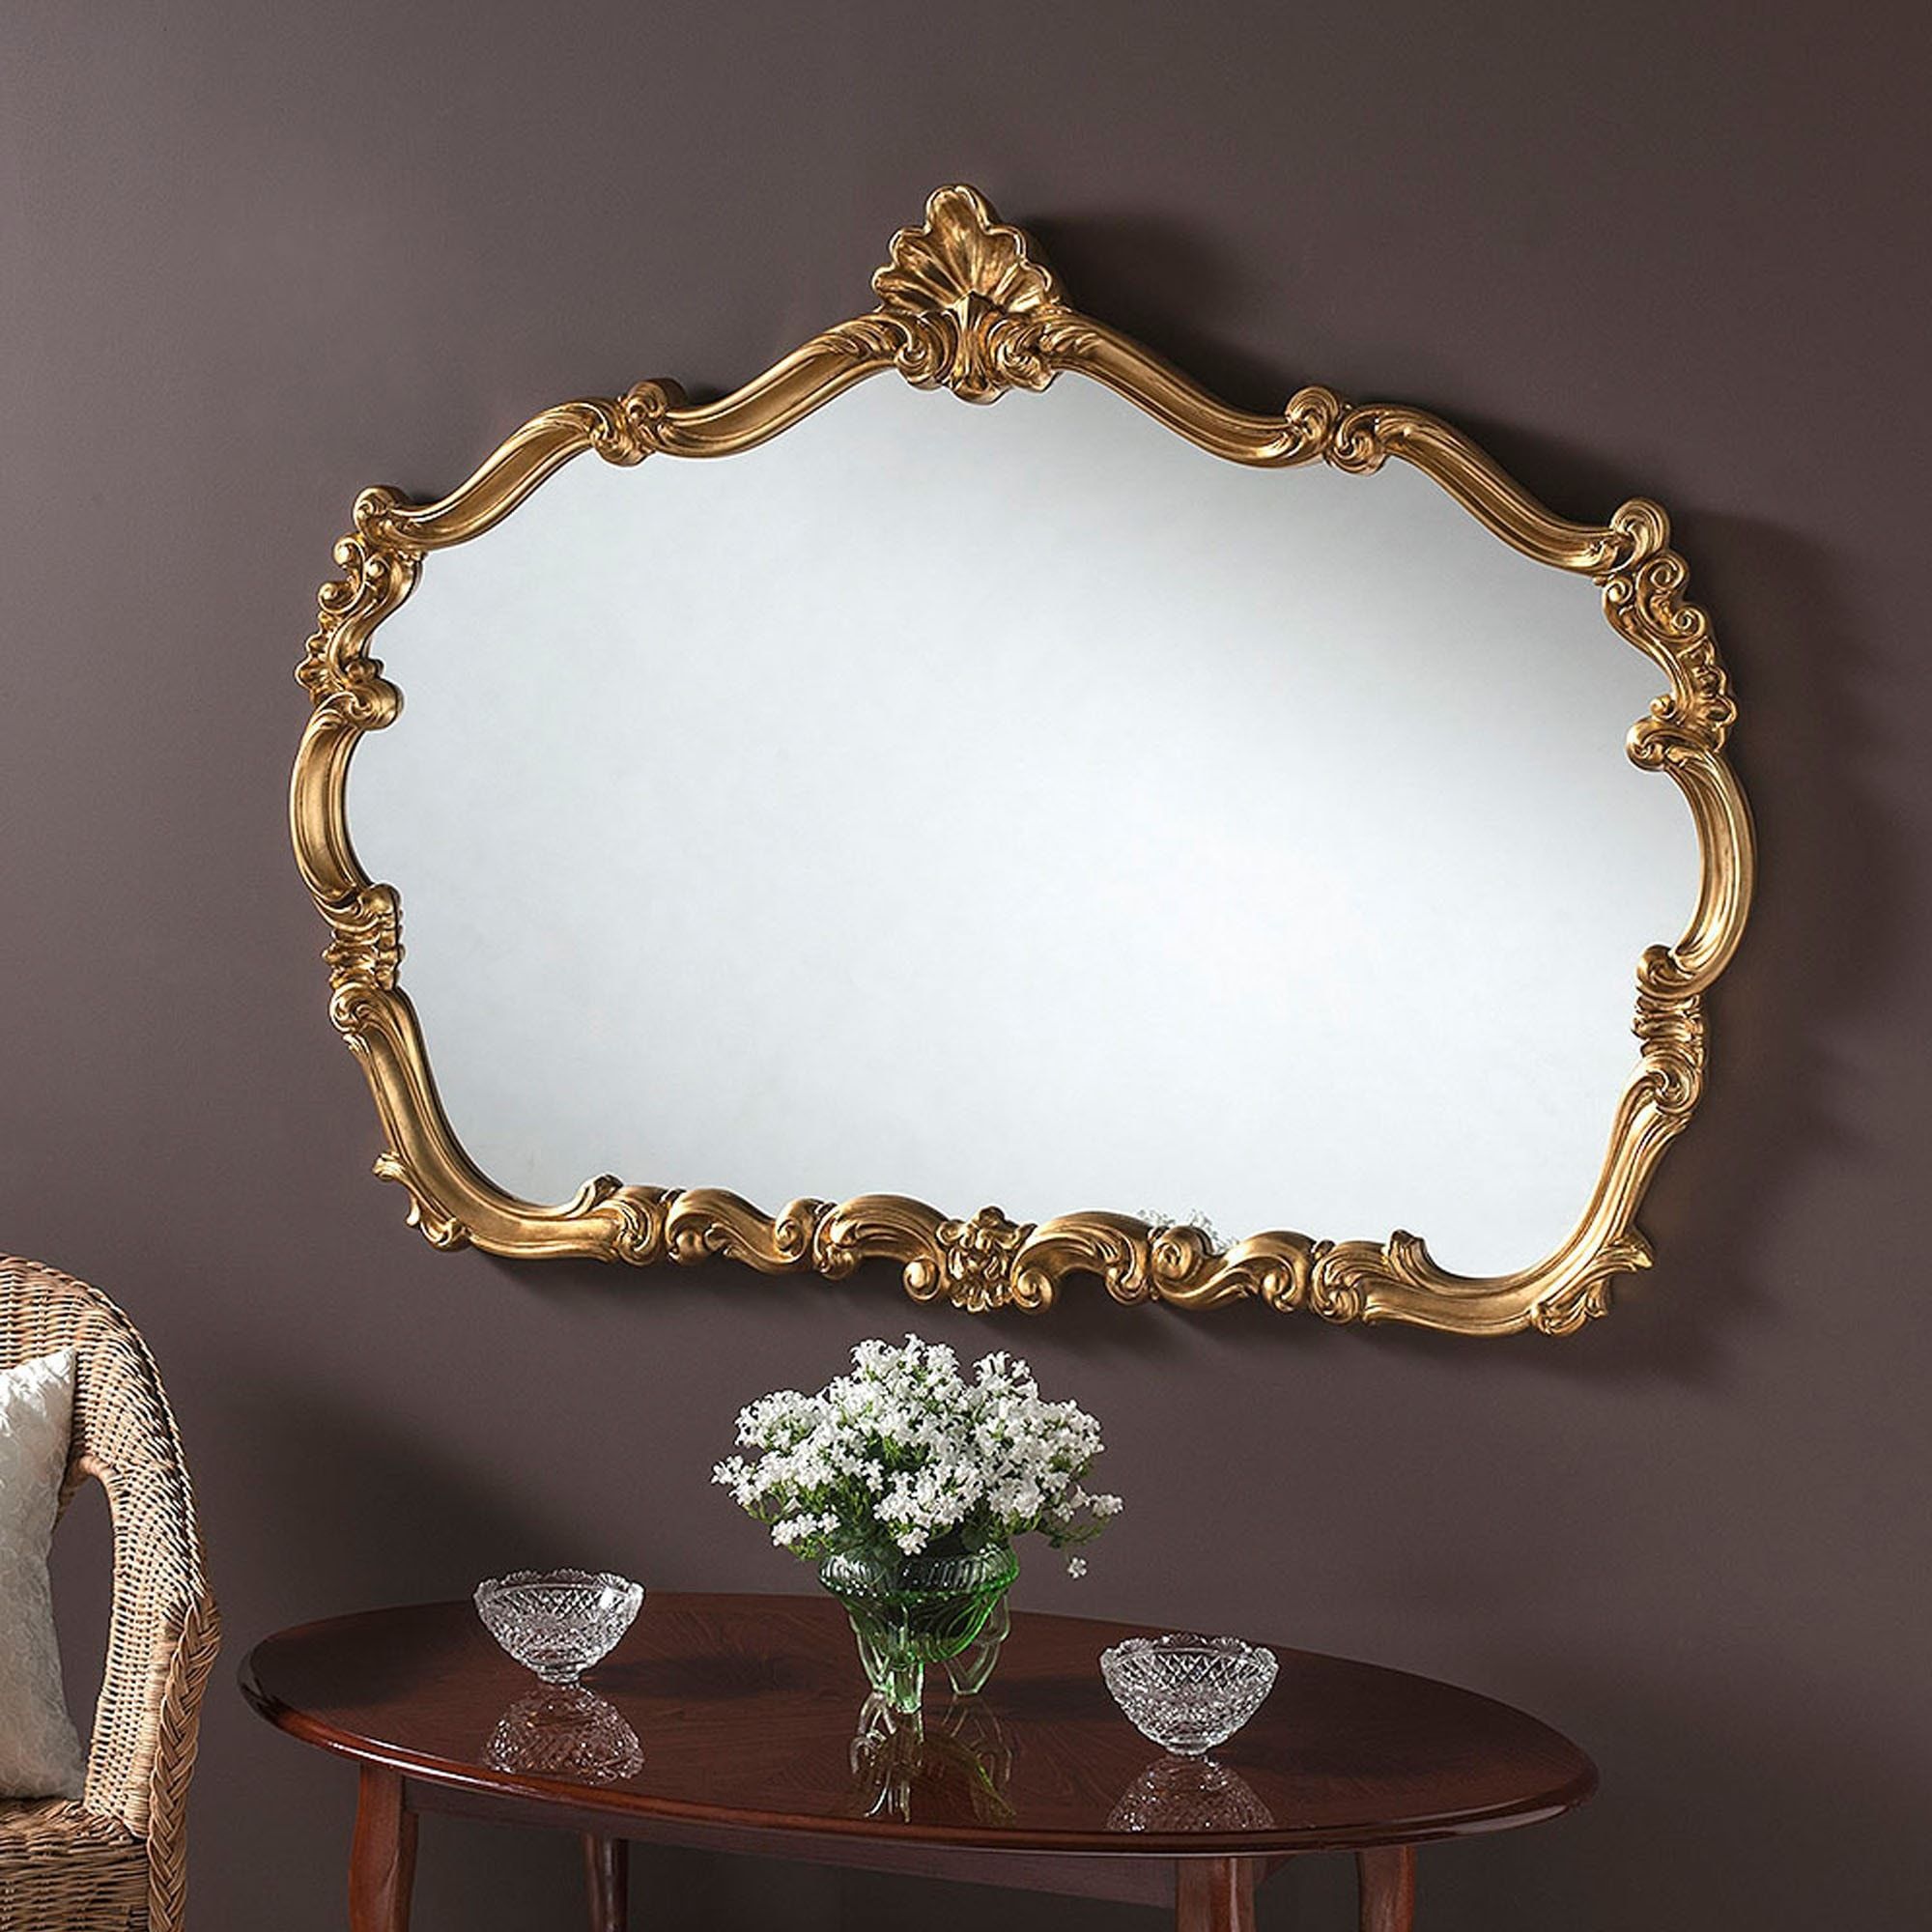 Antique French Style Gold Ornate Mirror | Gold Wall Mirror In Antique Gold Scallop Wall Mirrors (View 13 of 15)